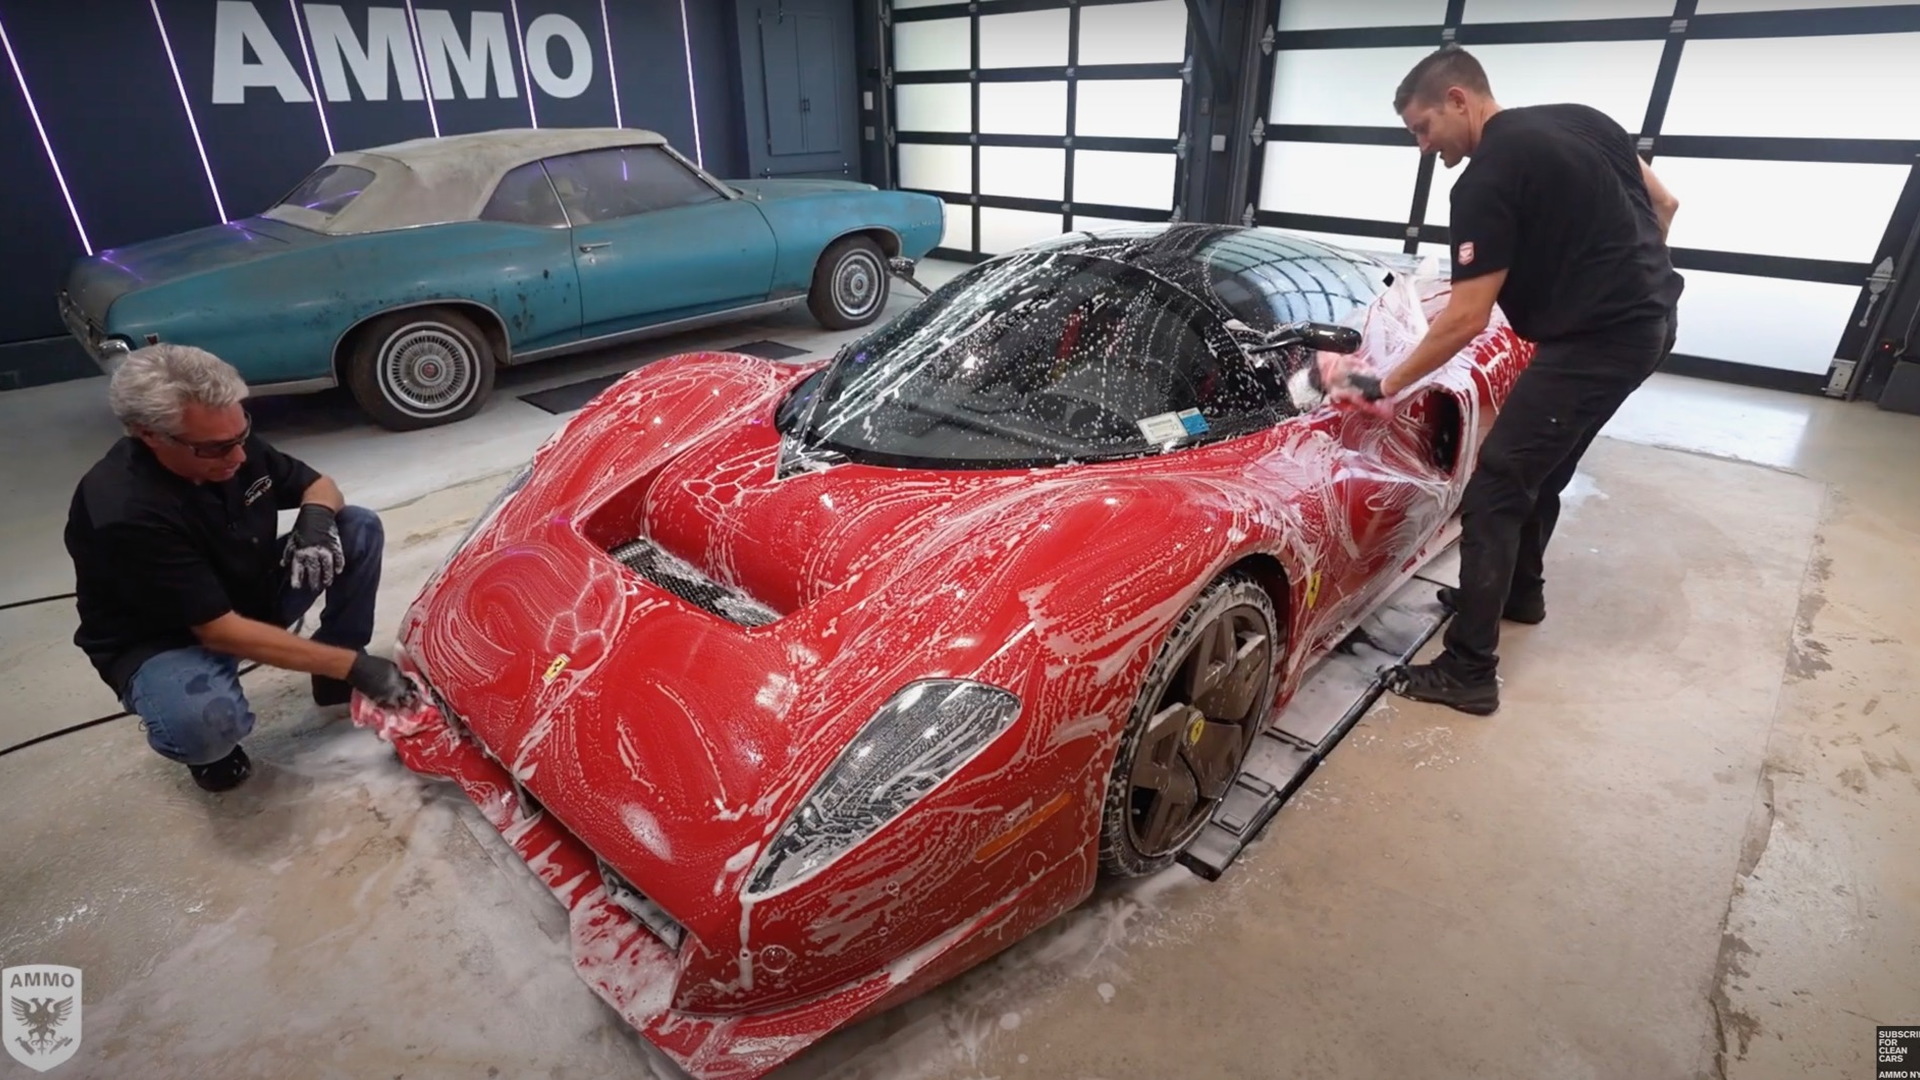 Glickenhaus Ferrari P4/5 gets washed and detailed (from Ammo NYC video)